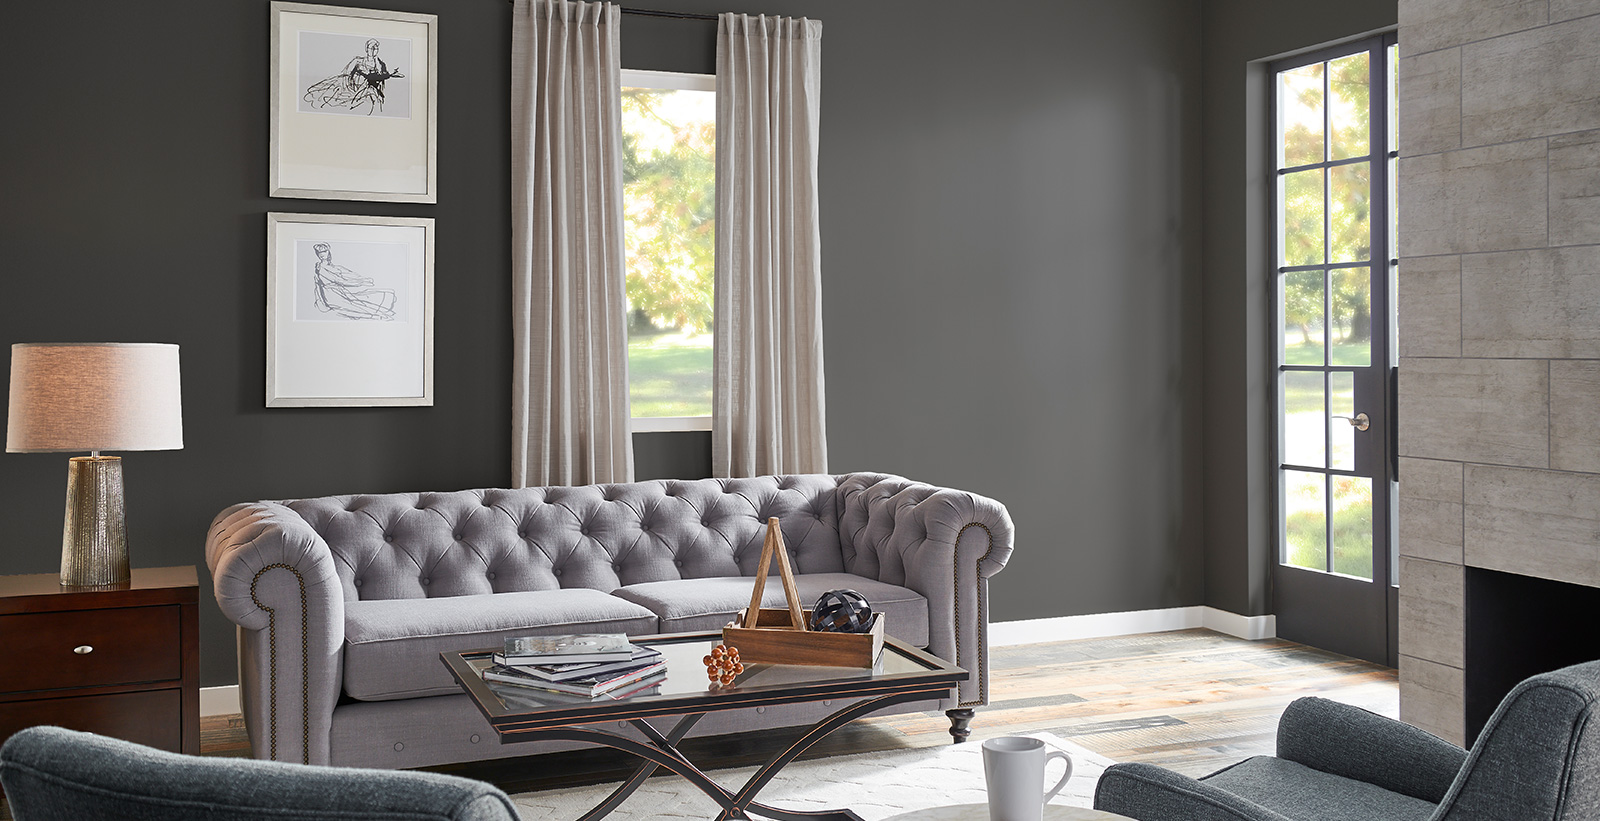 Minimal styled living room with dark gray on walls, white on trim, and light gray tufted couch